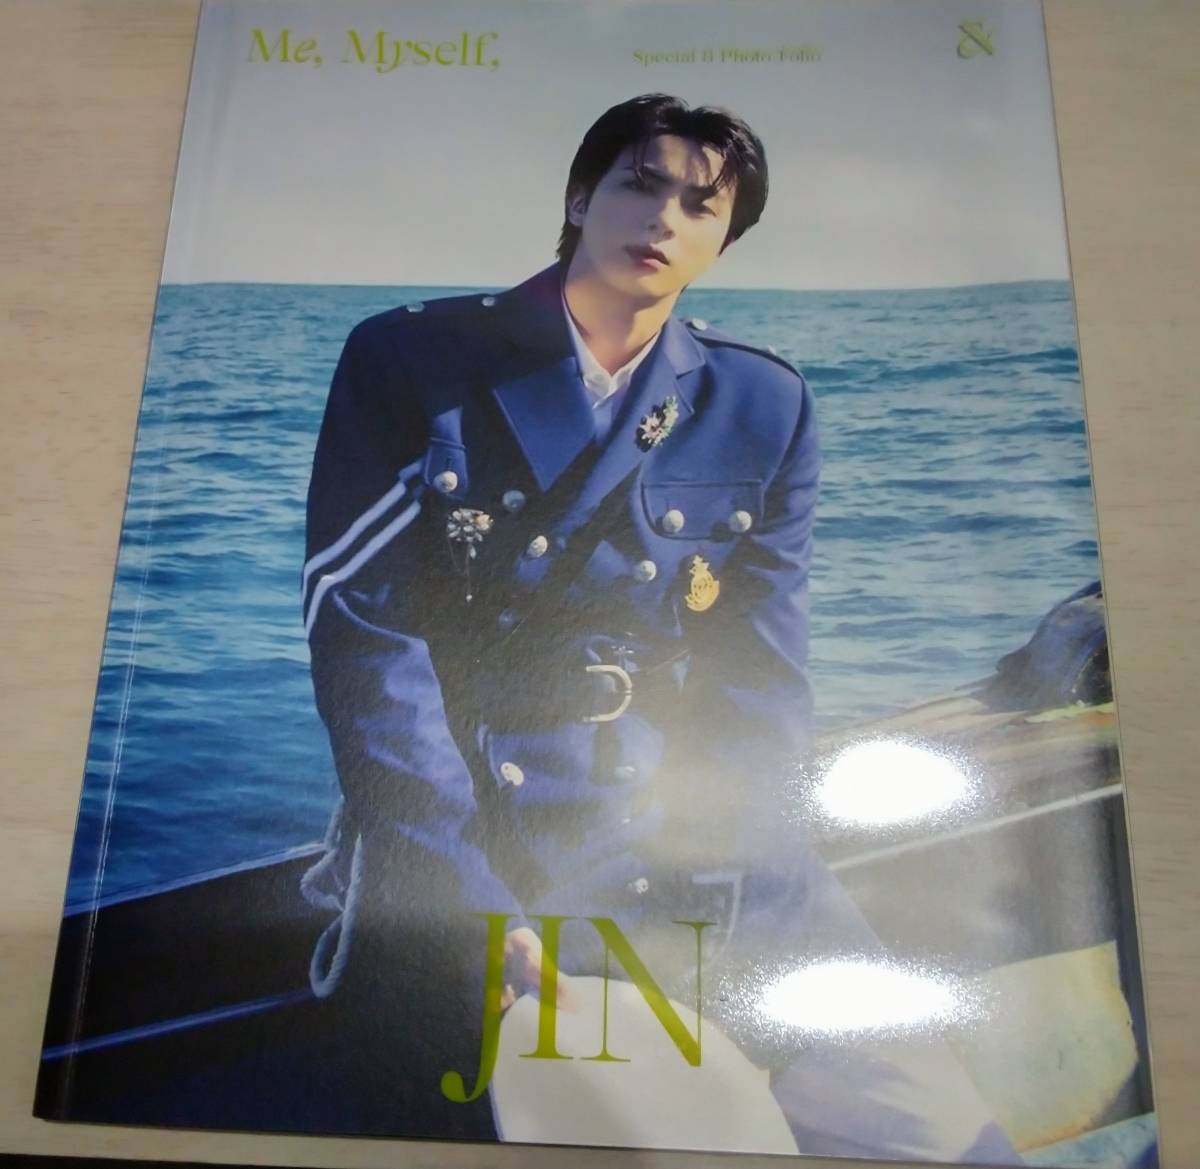 BTS 「JIN」 写真集 Special 8 Photo-Folio 「Me Myself and Jin Sea of JIN island」 公式 フォトブック ソロ ジン ソクジンの画像1